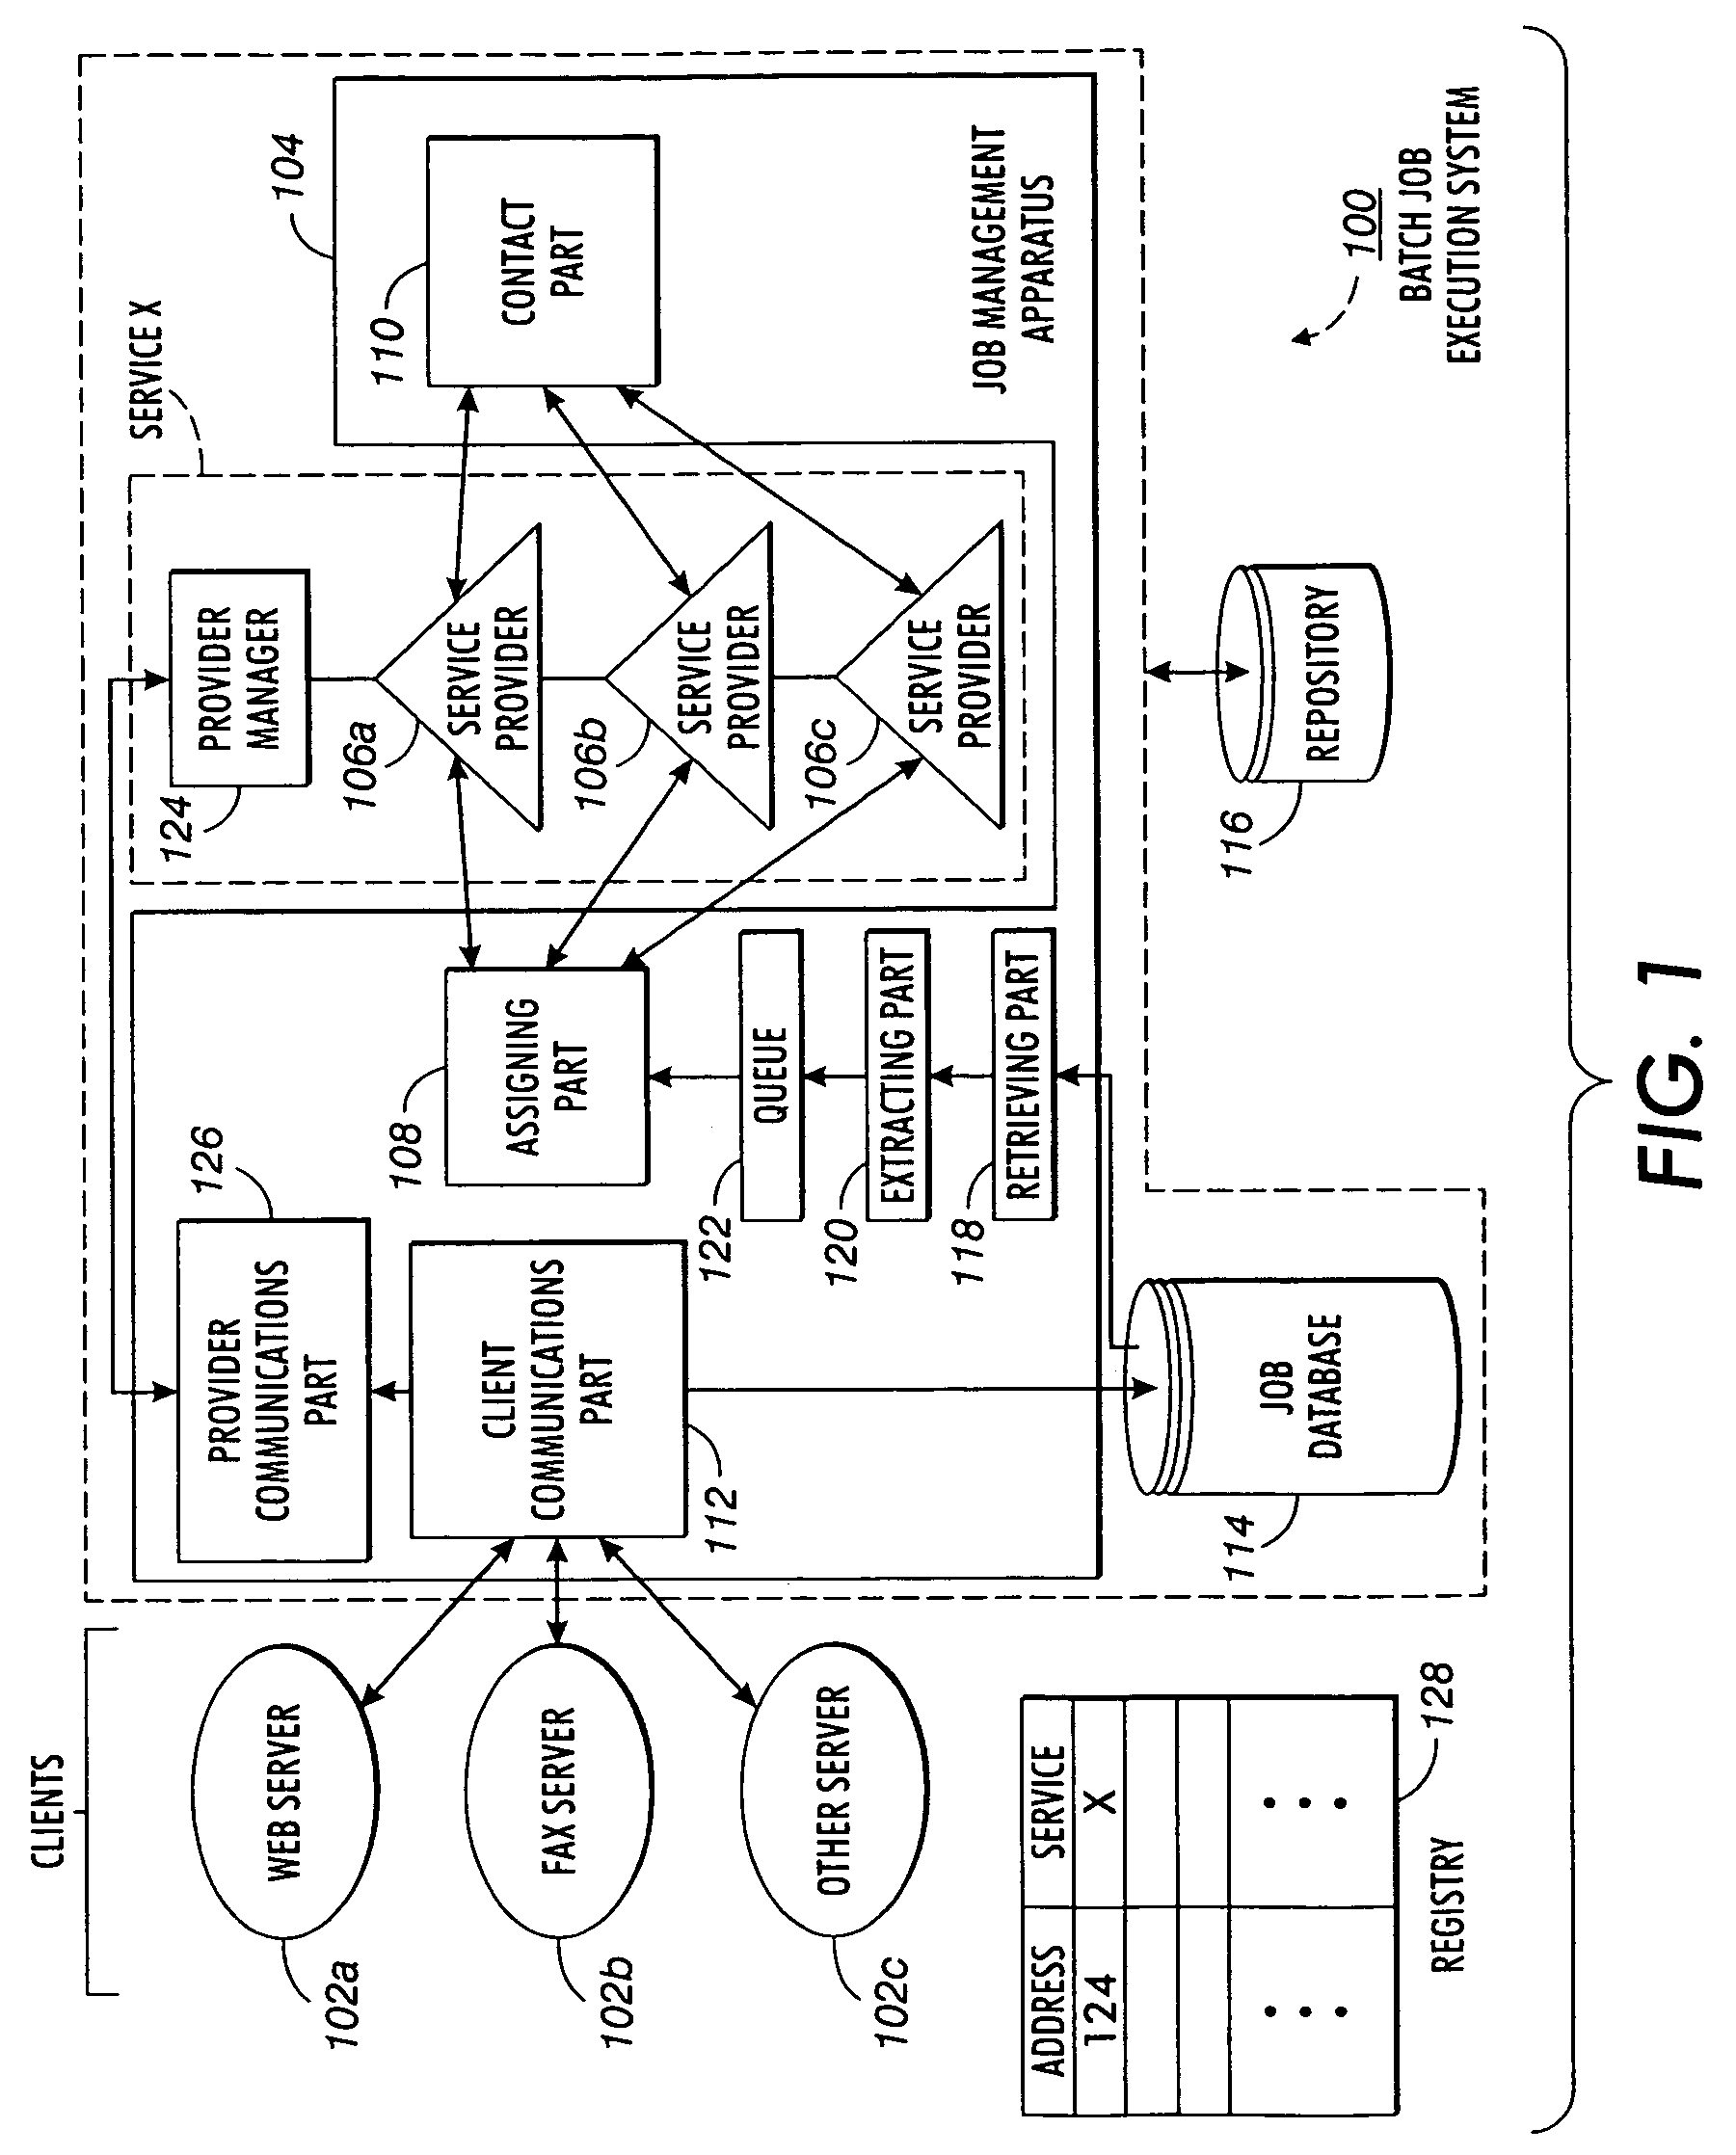 Method and system for executing batch jobs by delegating work to independent service providers